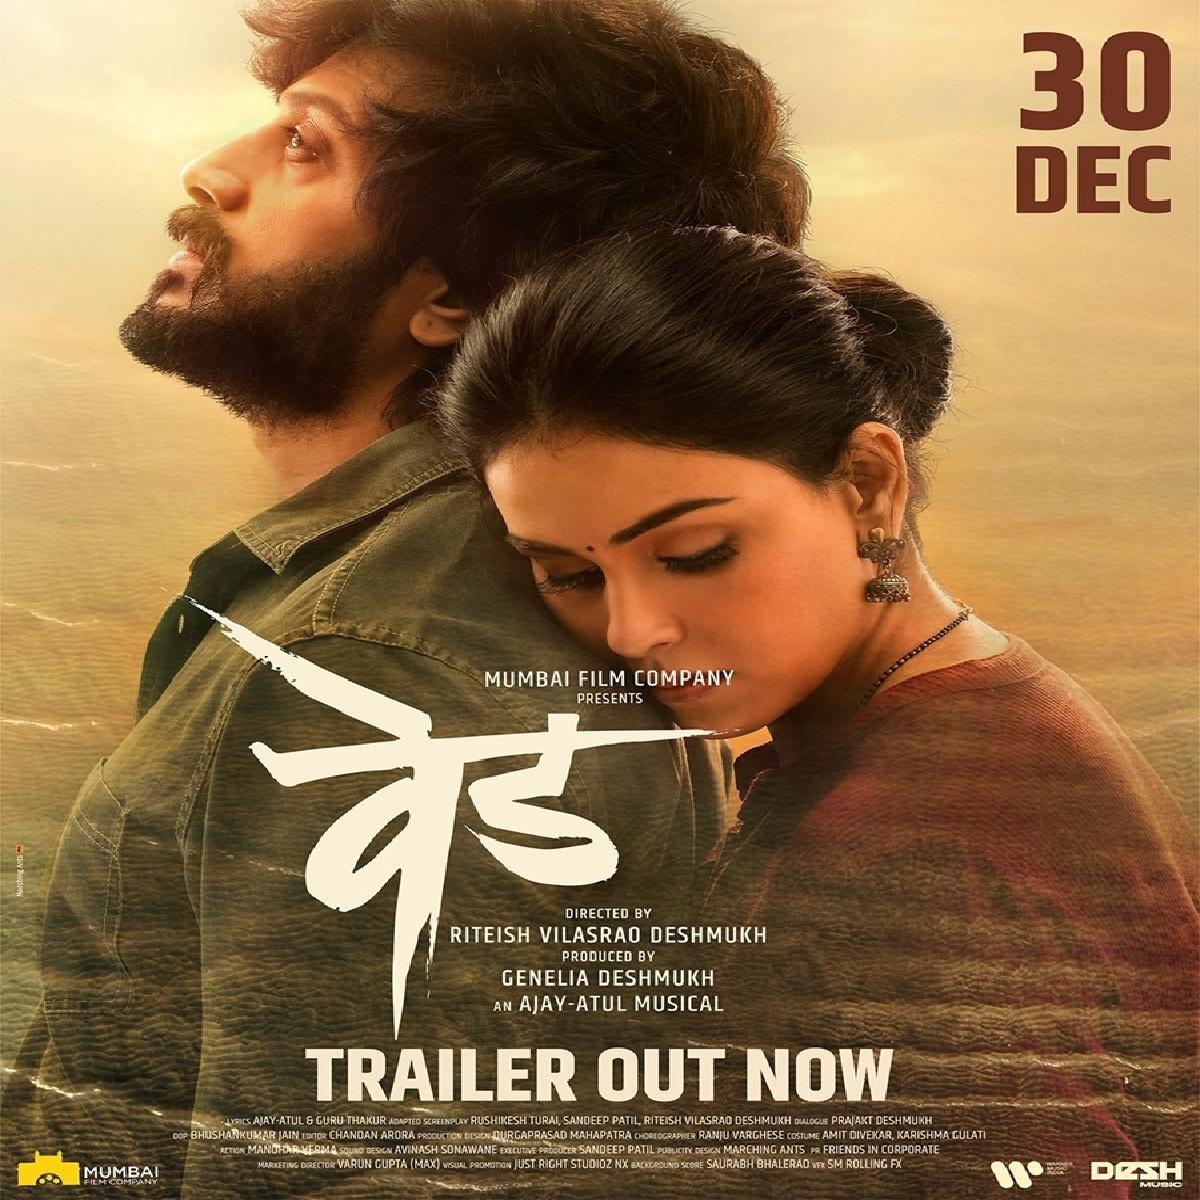 Ved Trailer Out Now, Starring Riteish Deshmukh And Genelia Deshmukh